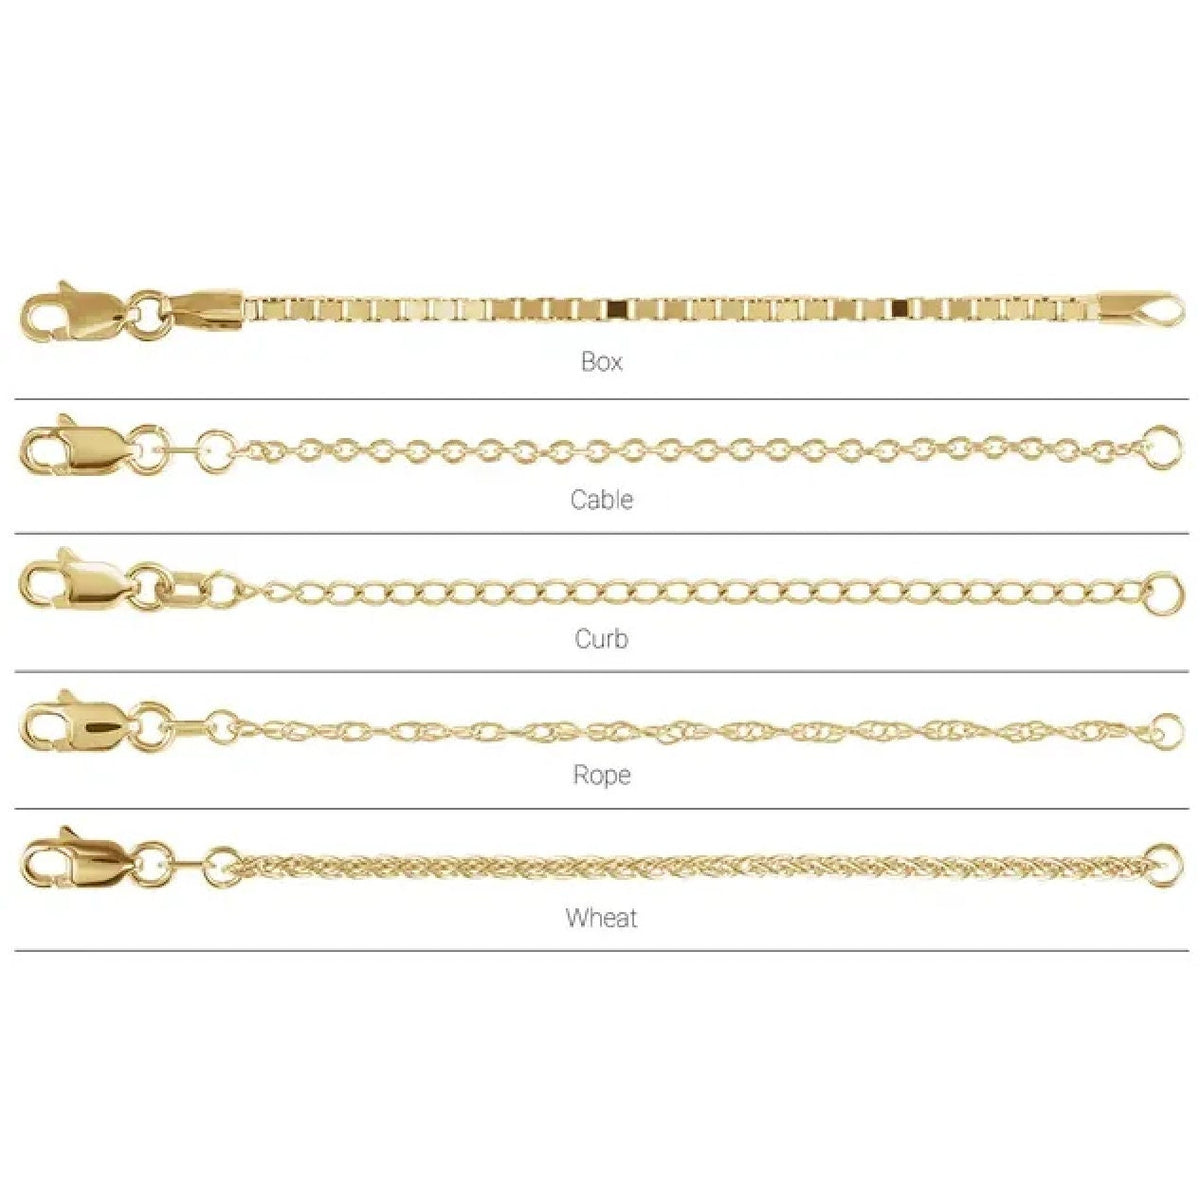 Gold Extension Chain Extensions Chains Jewelry Extenders Clasp For Bracelet  Necklace Extension Chain Bracelet Gold Extension Chains For Necklace And B